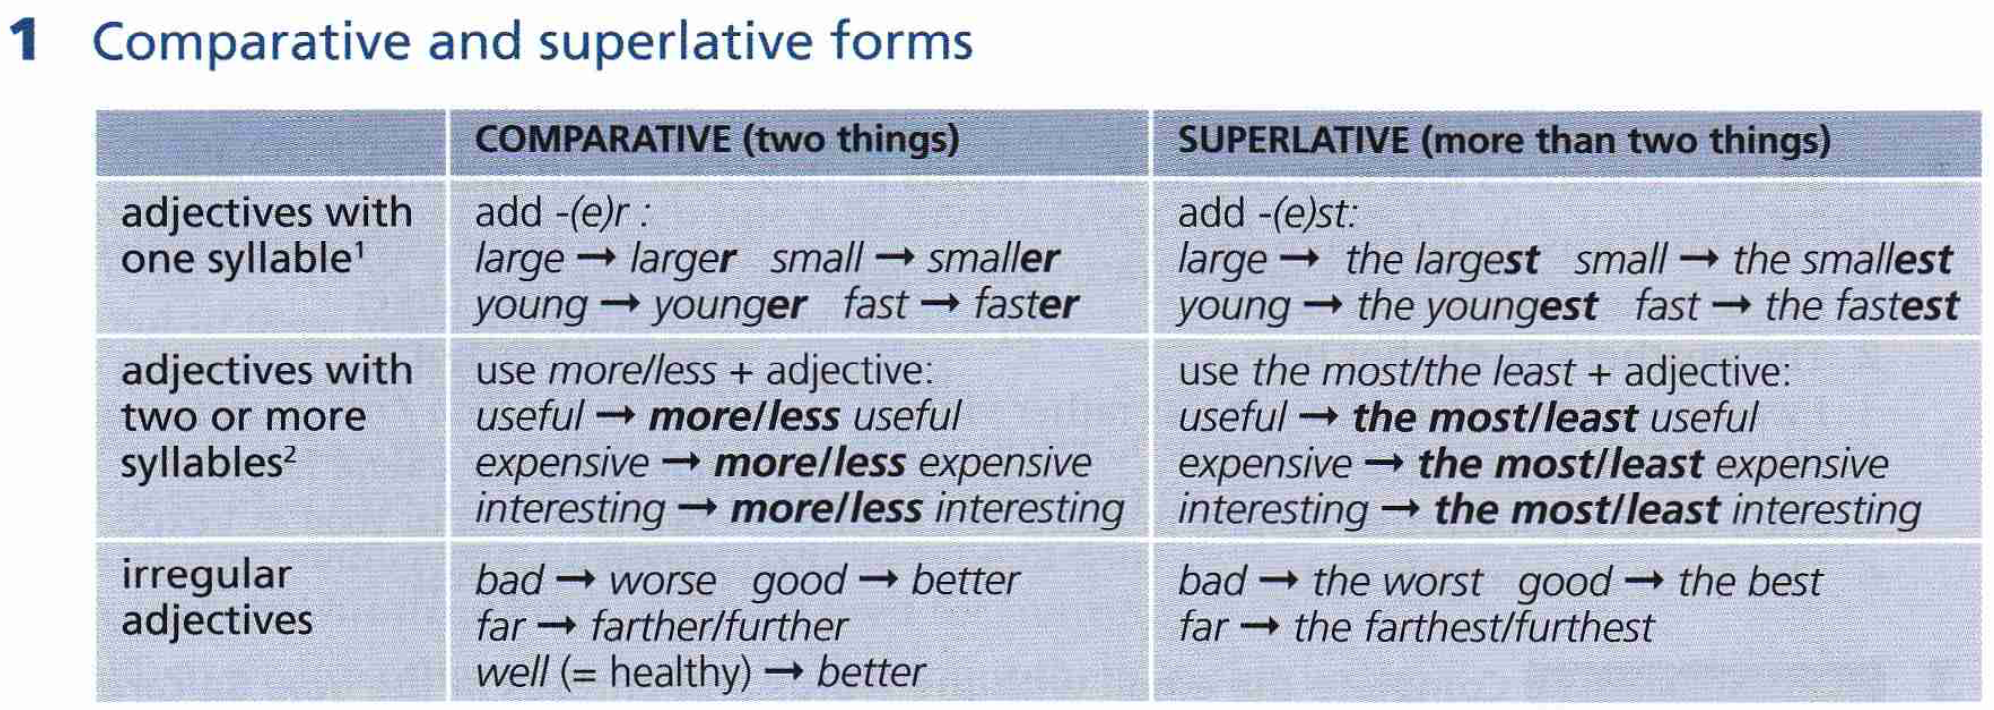 Dirty comparative. Comparatives and Superlatives правило. Таблица Comparative and Superlative. Comparative and Superlative adjectives правило. Degrees of Comparison of adjectives таблица.